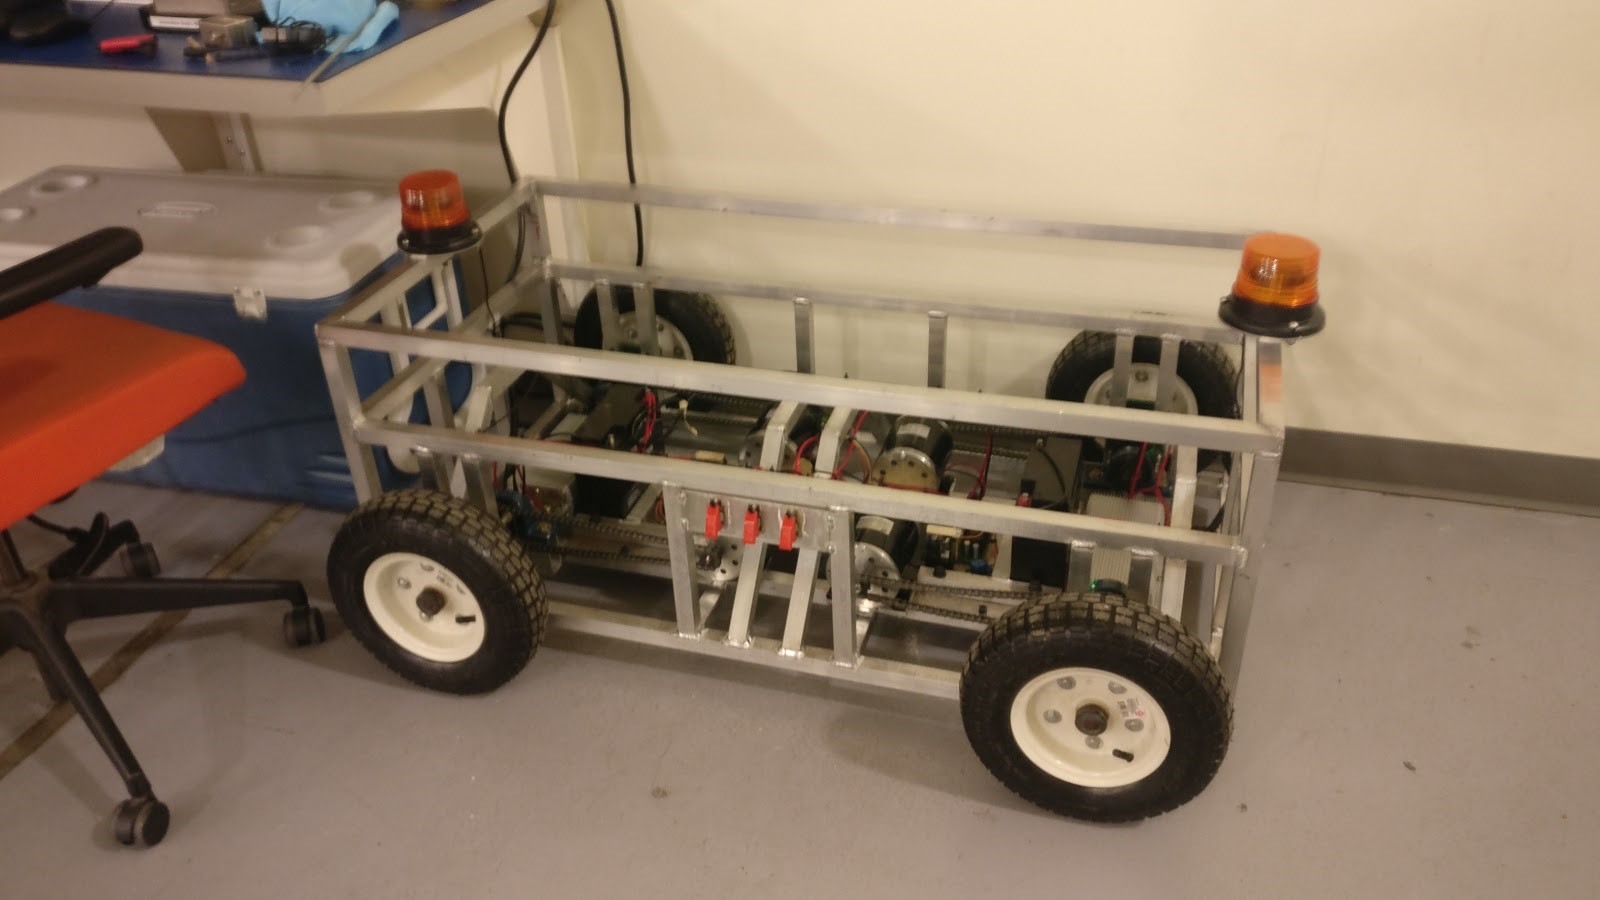 The robotic mule in its first iteration of construction. Four wheels hug a sturdy aluminum frame, which can carry up to 1000lbs